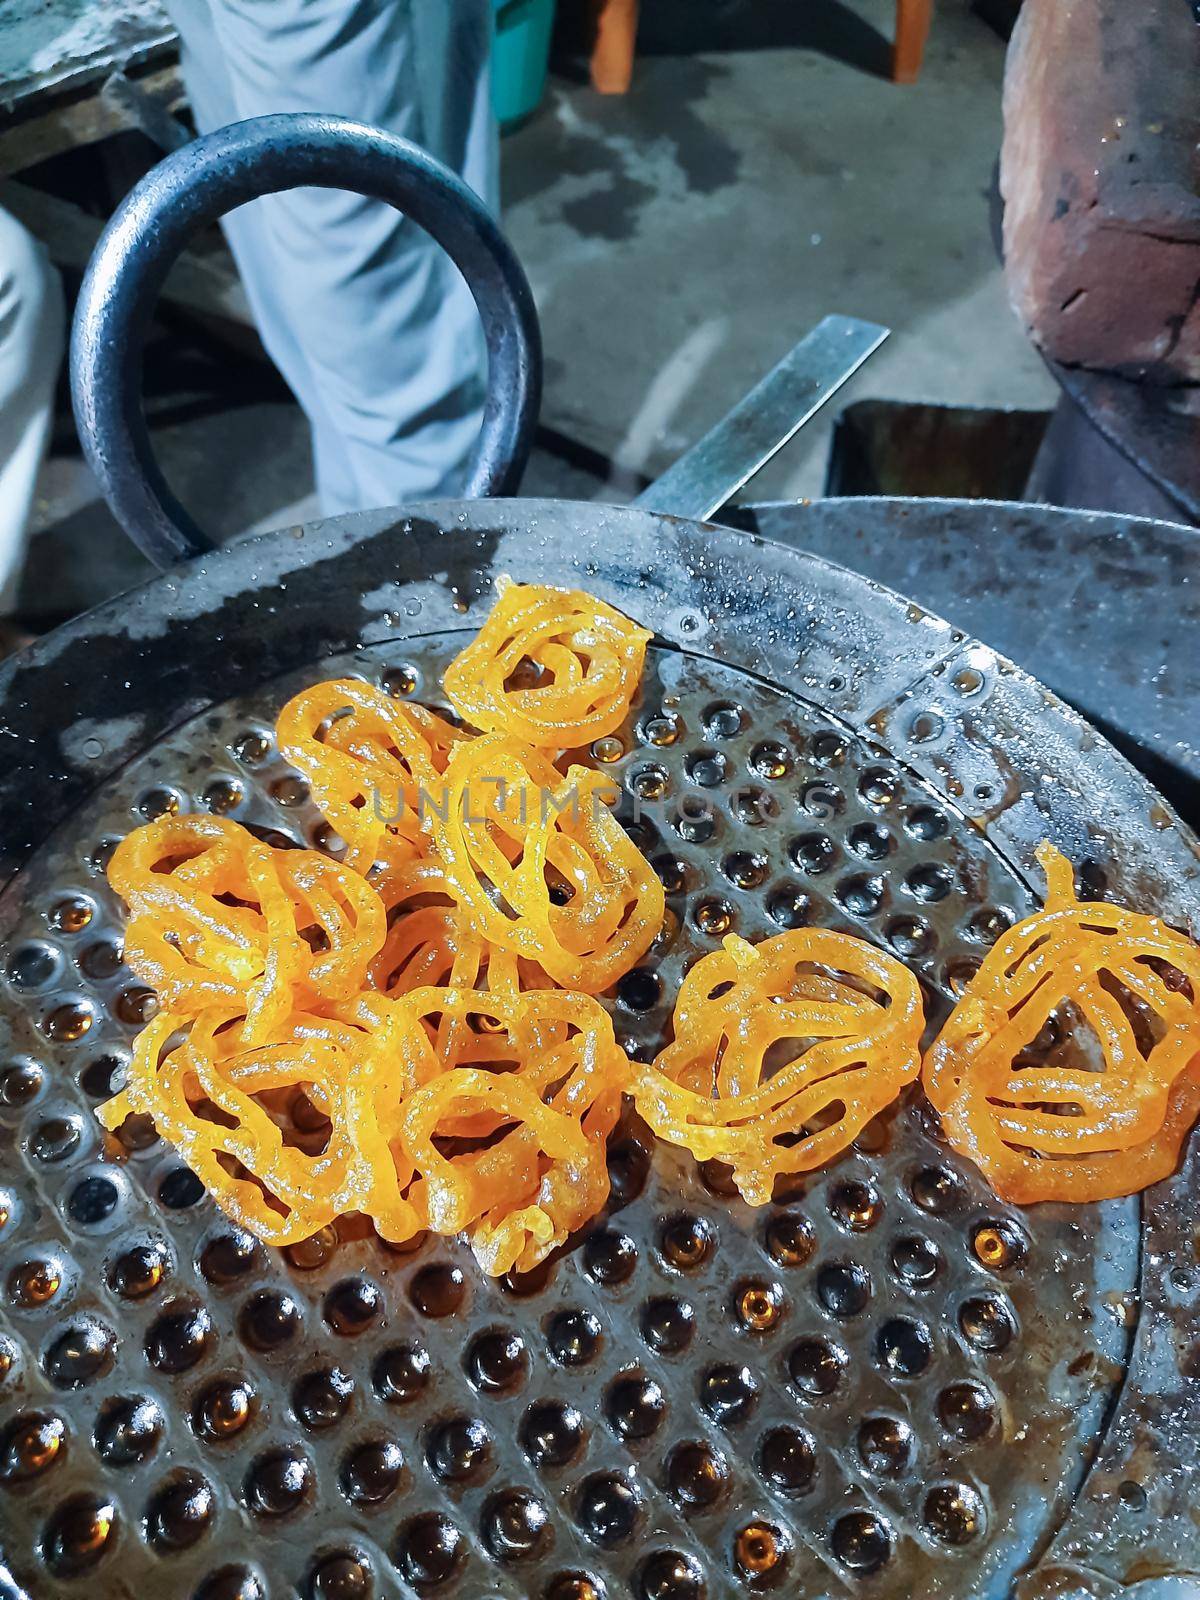 Jalebi is a famous indian sweet. This shows how jalebi are 1st fried in oil by tabishere